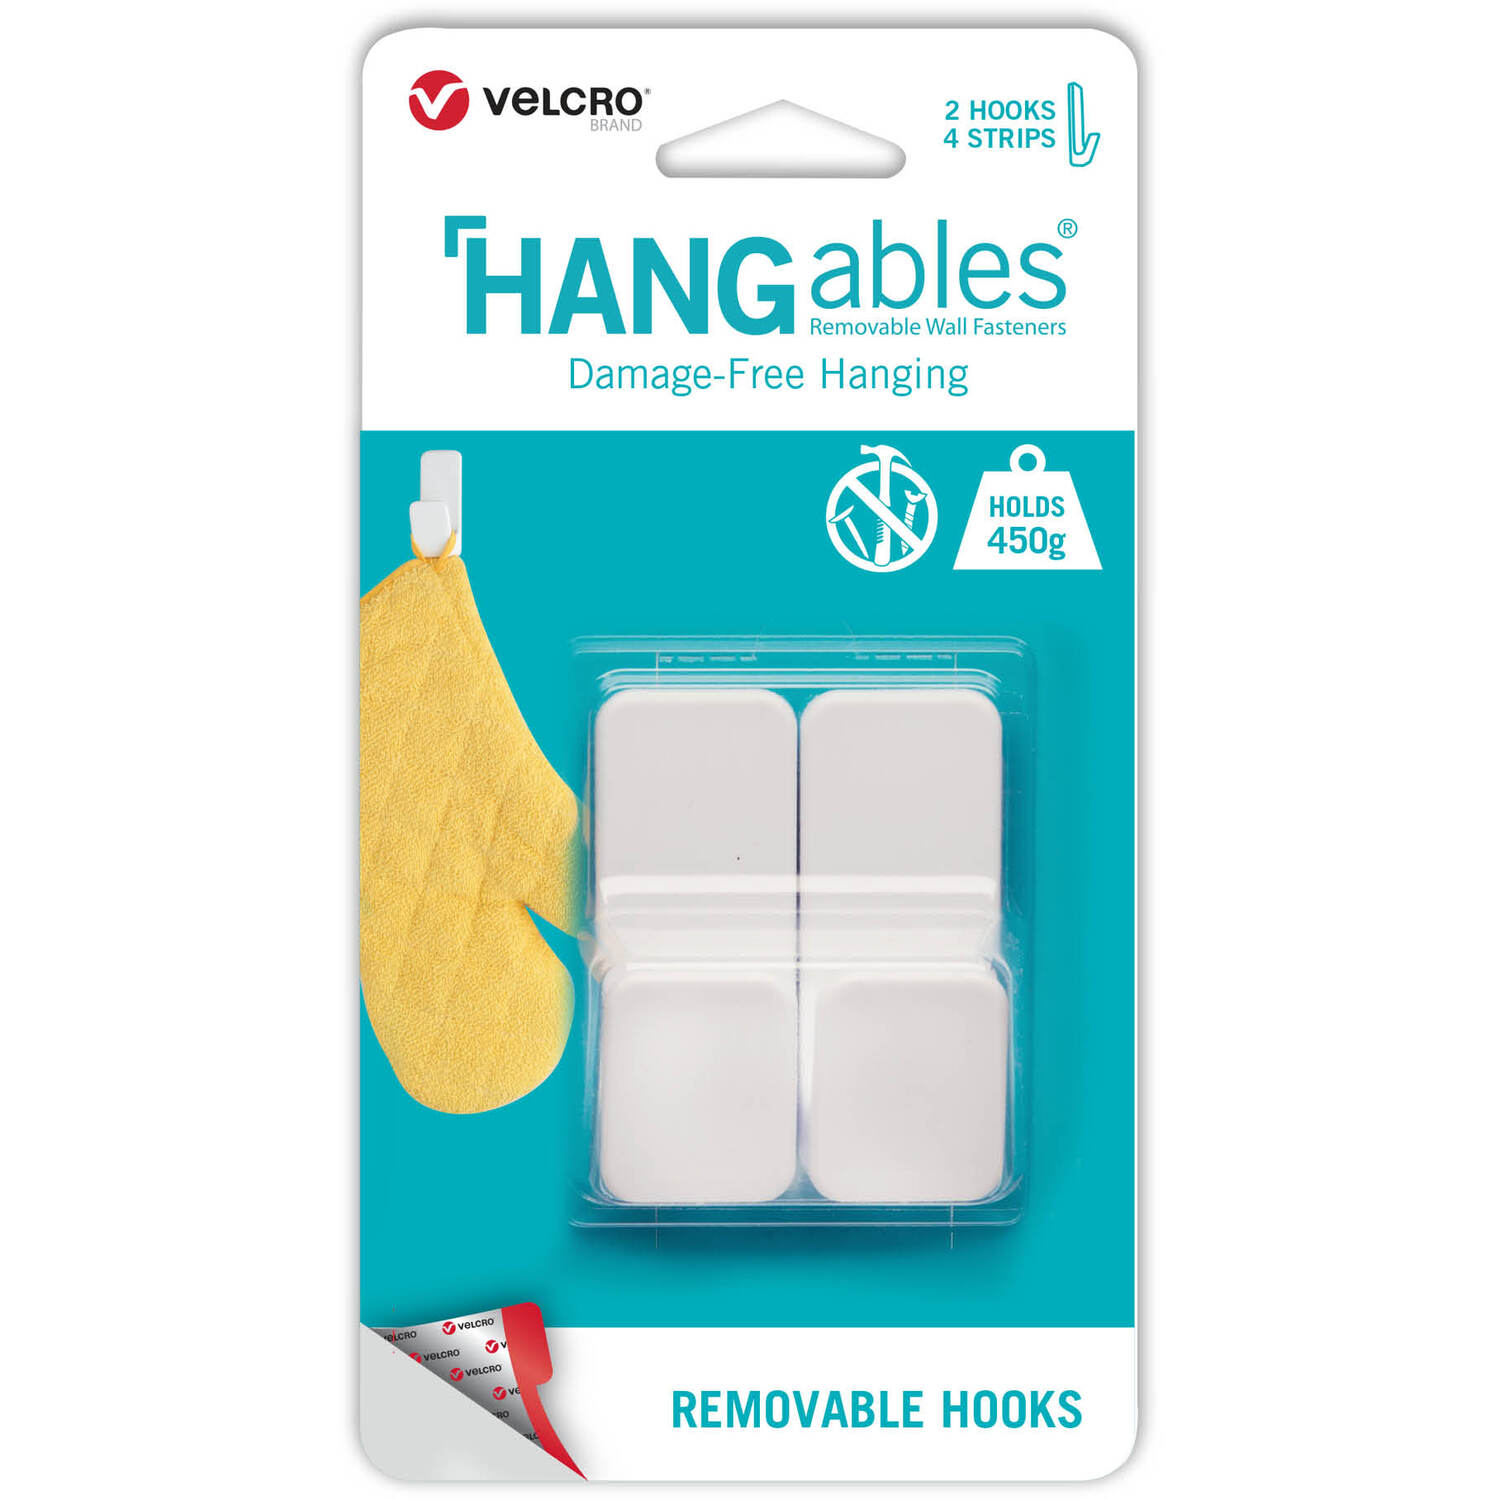 Velcro Hangables Removable Small Hook 2 Pack Image 1